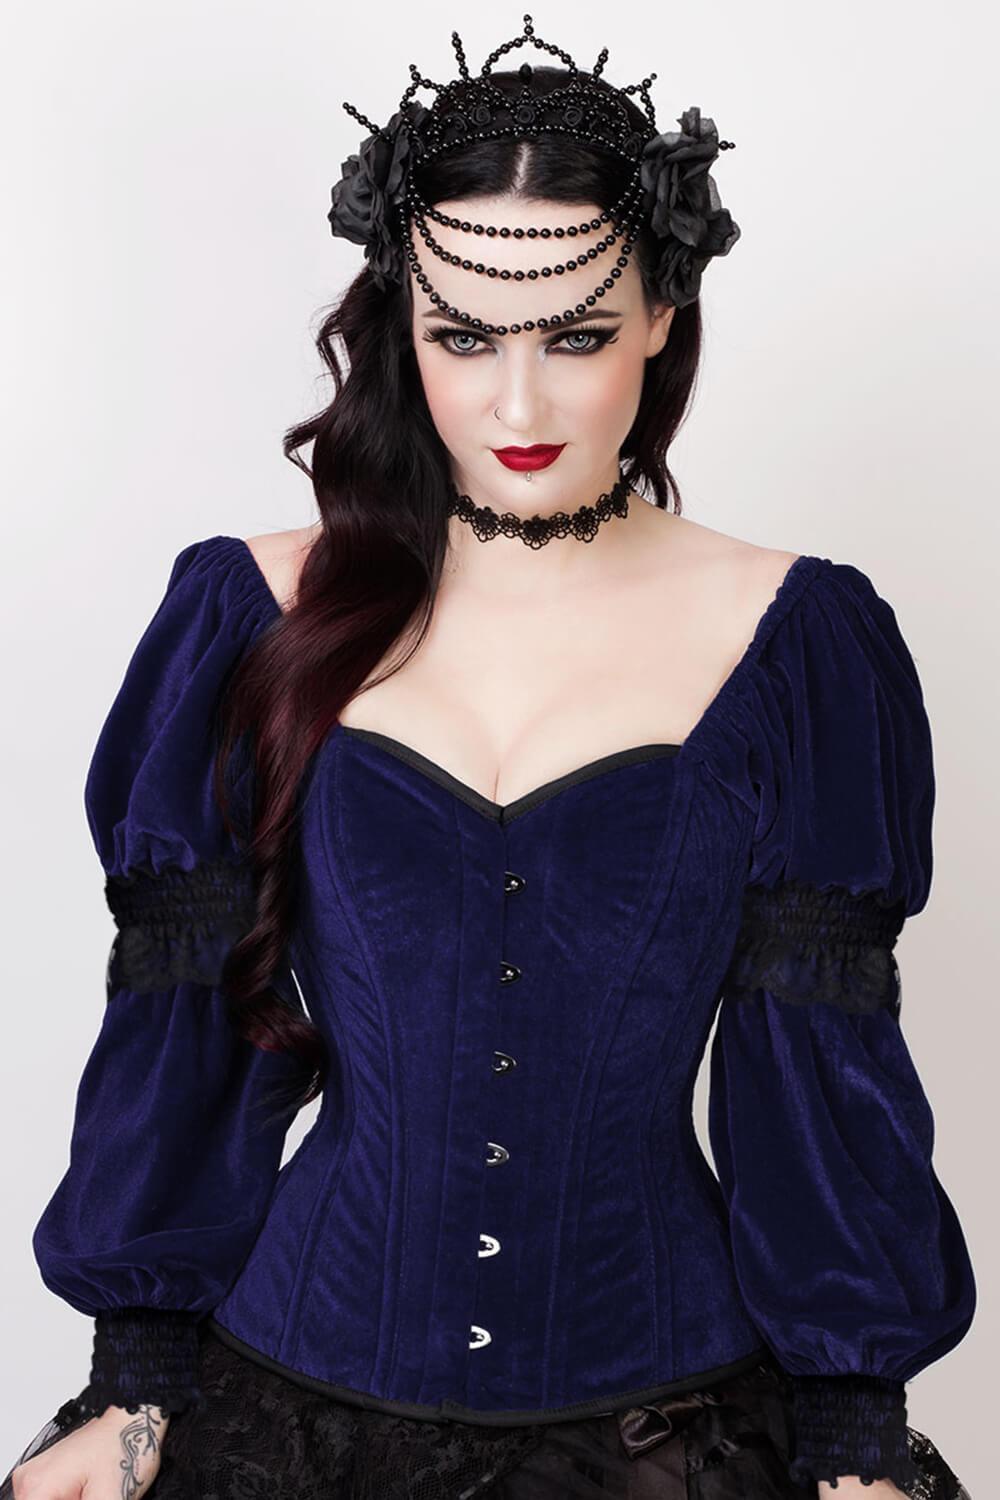 Choose the Best Designs of Bespoke Corsets & Victorian Corset from us